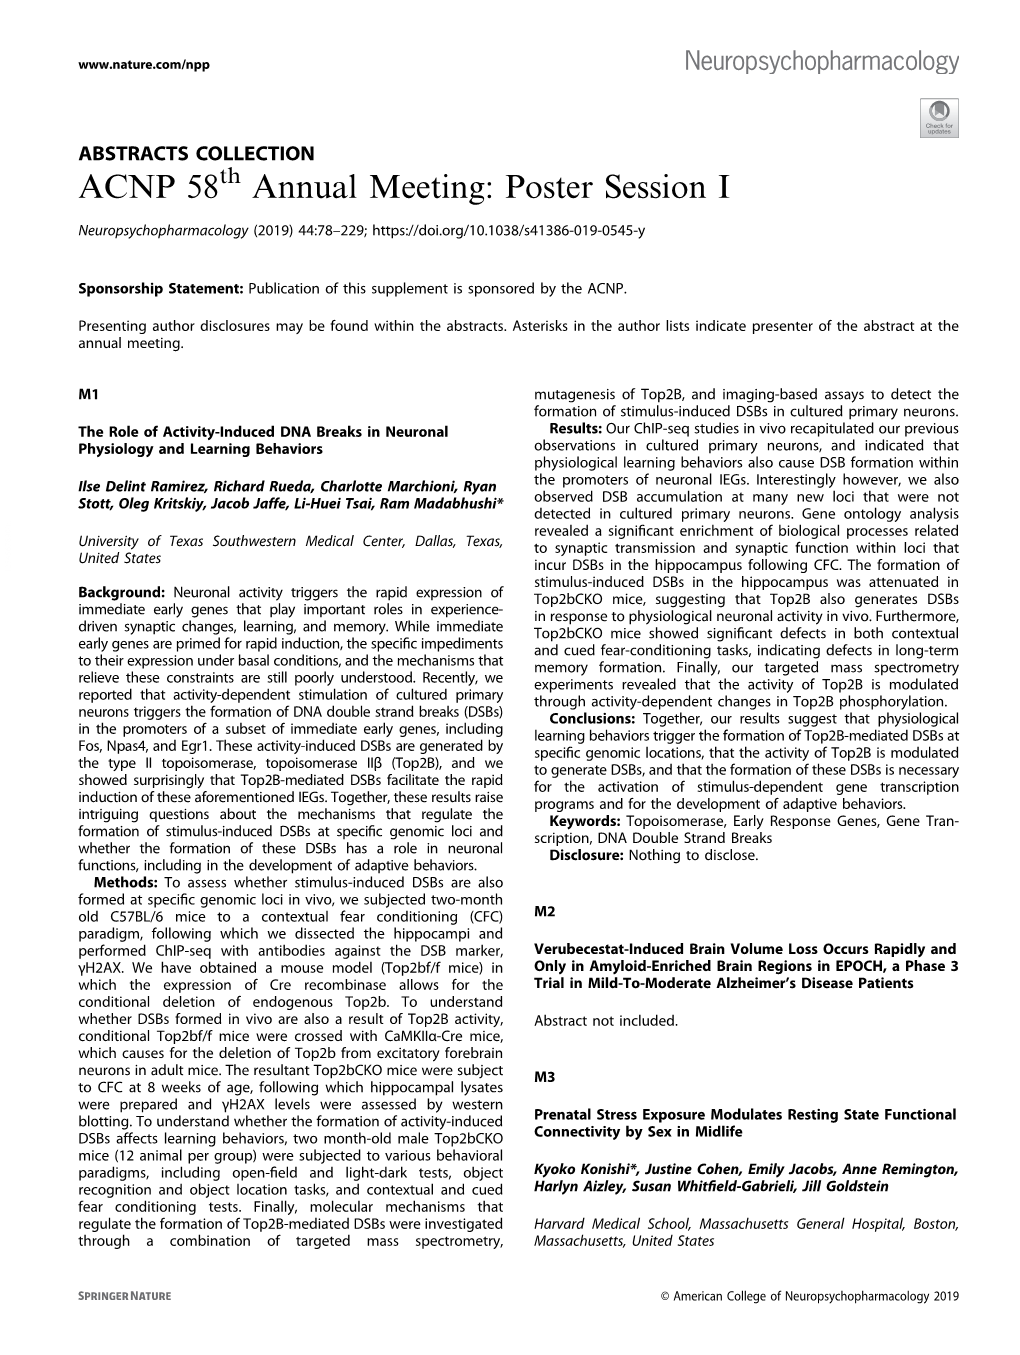 ACNP 58Th Annual Meeting: Poster Session I